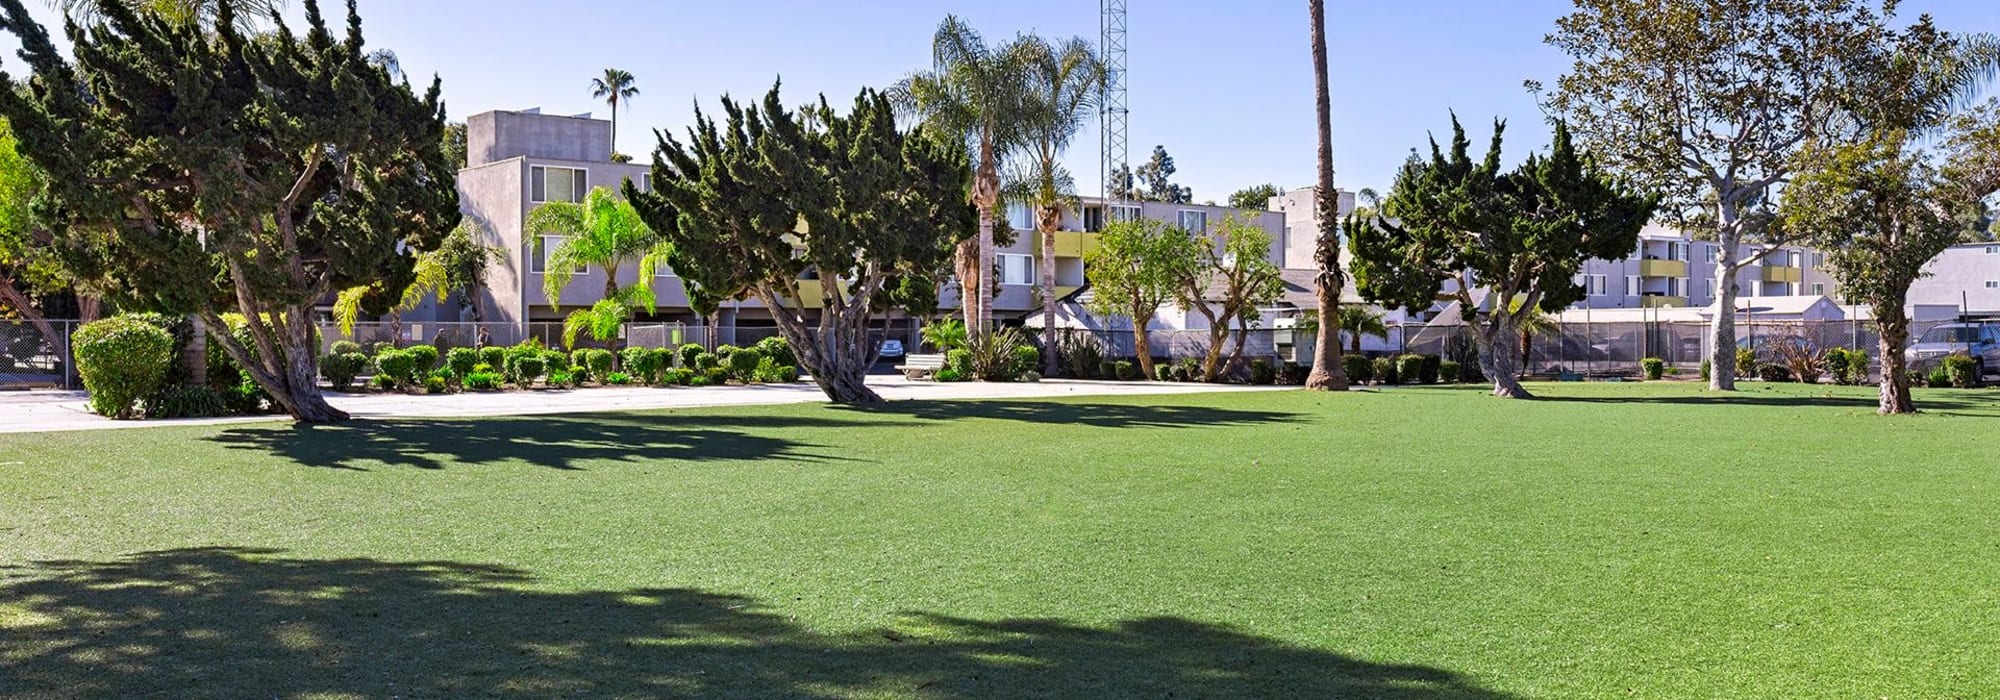 Community area of The Residences at Woodlake in Los Angeles, California